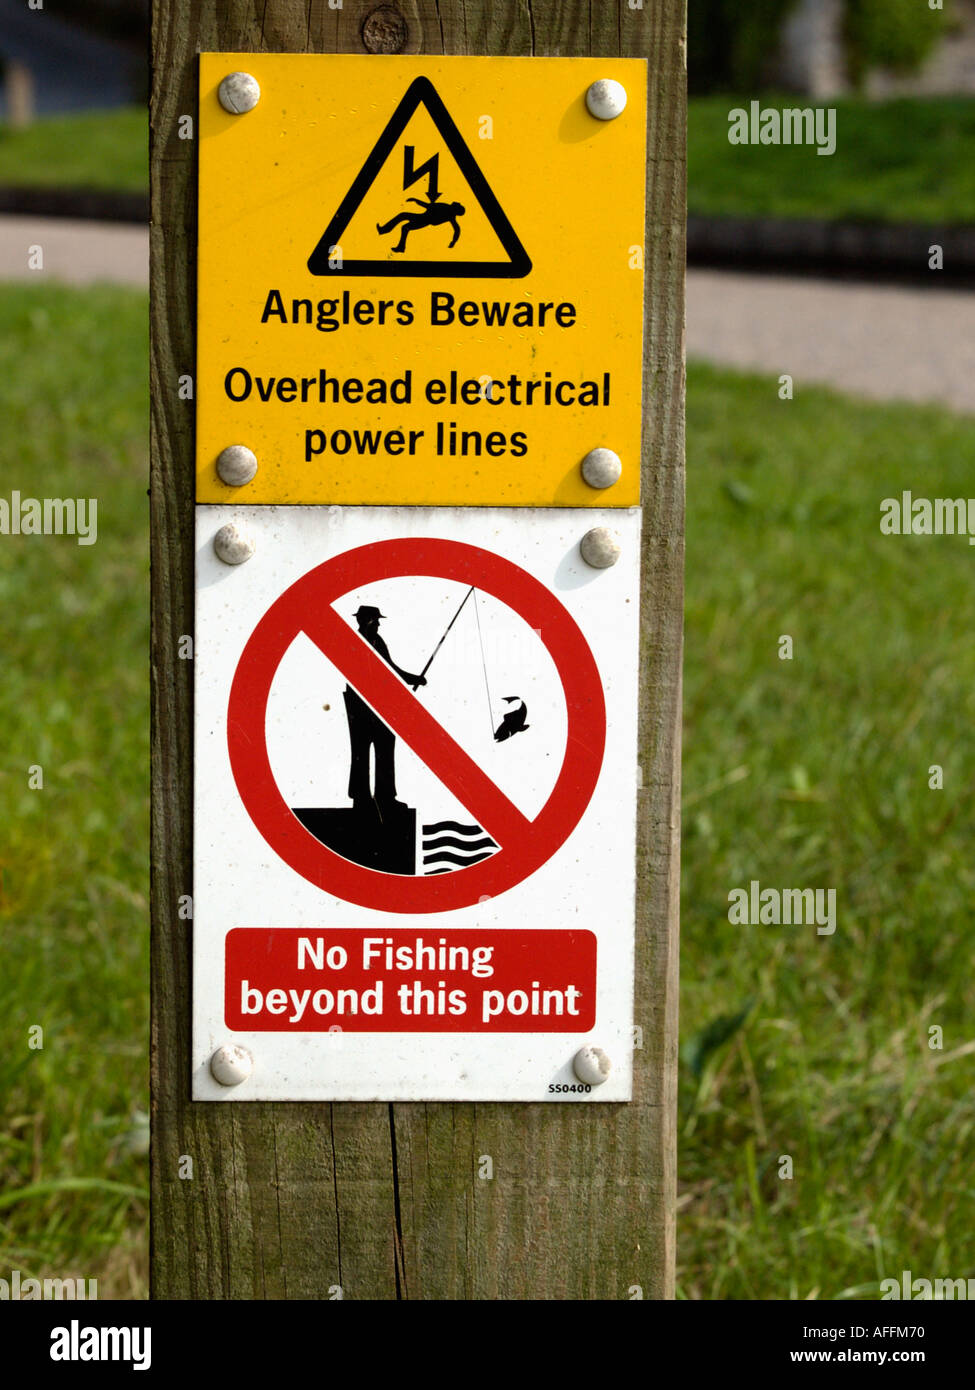 No Fishing Sign Warning of overhead cables Stock Photo - Alamy